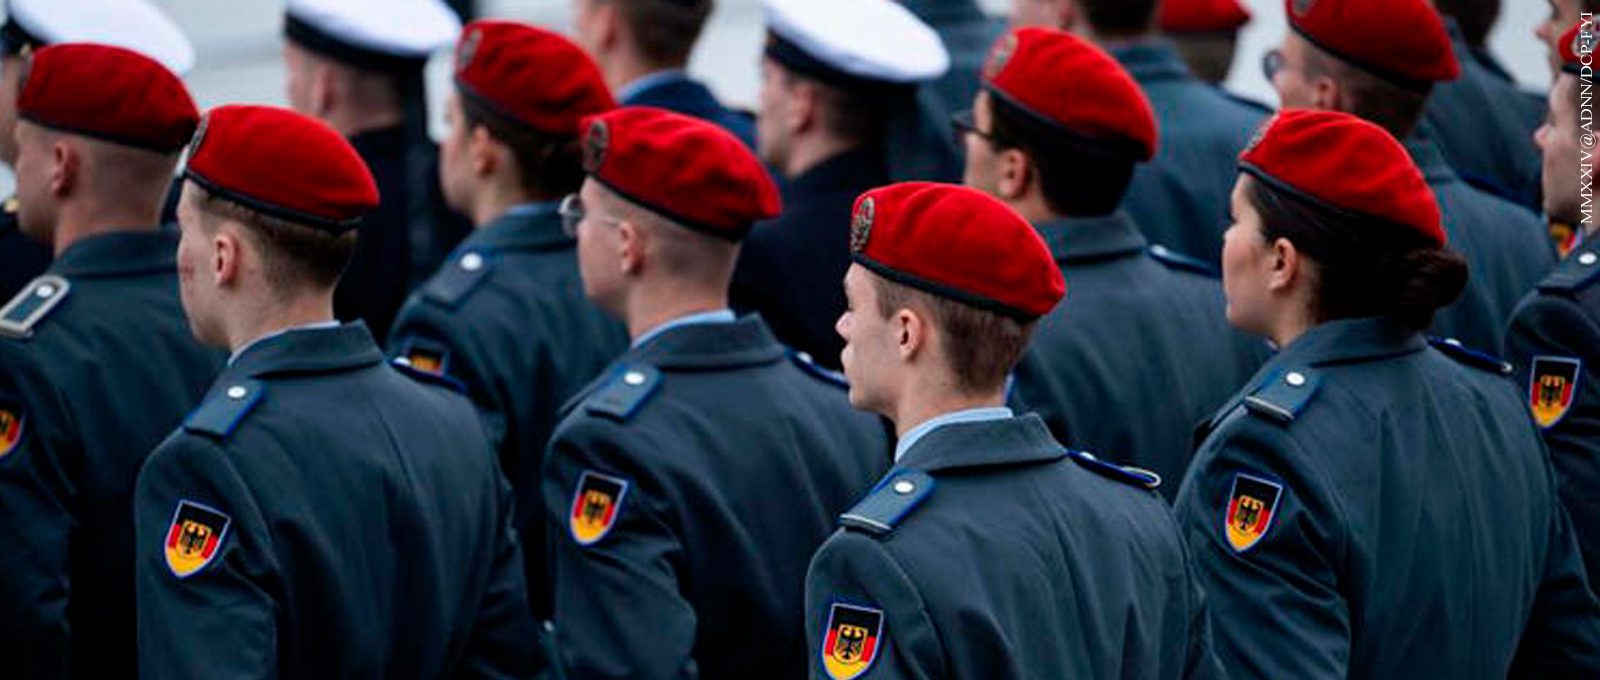 Armed Forces reform should make Germany "war-ready", says minister